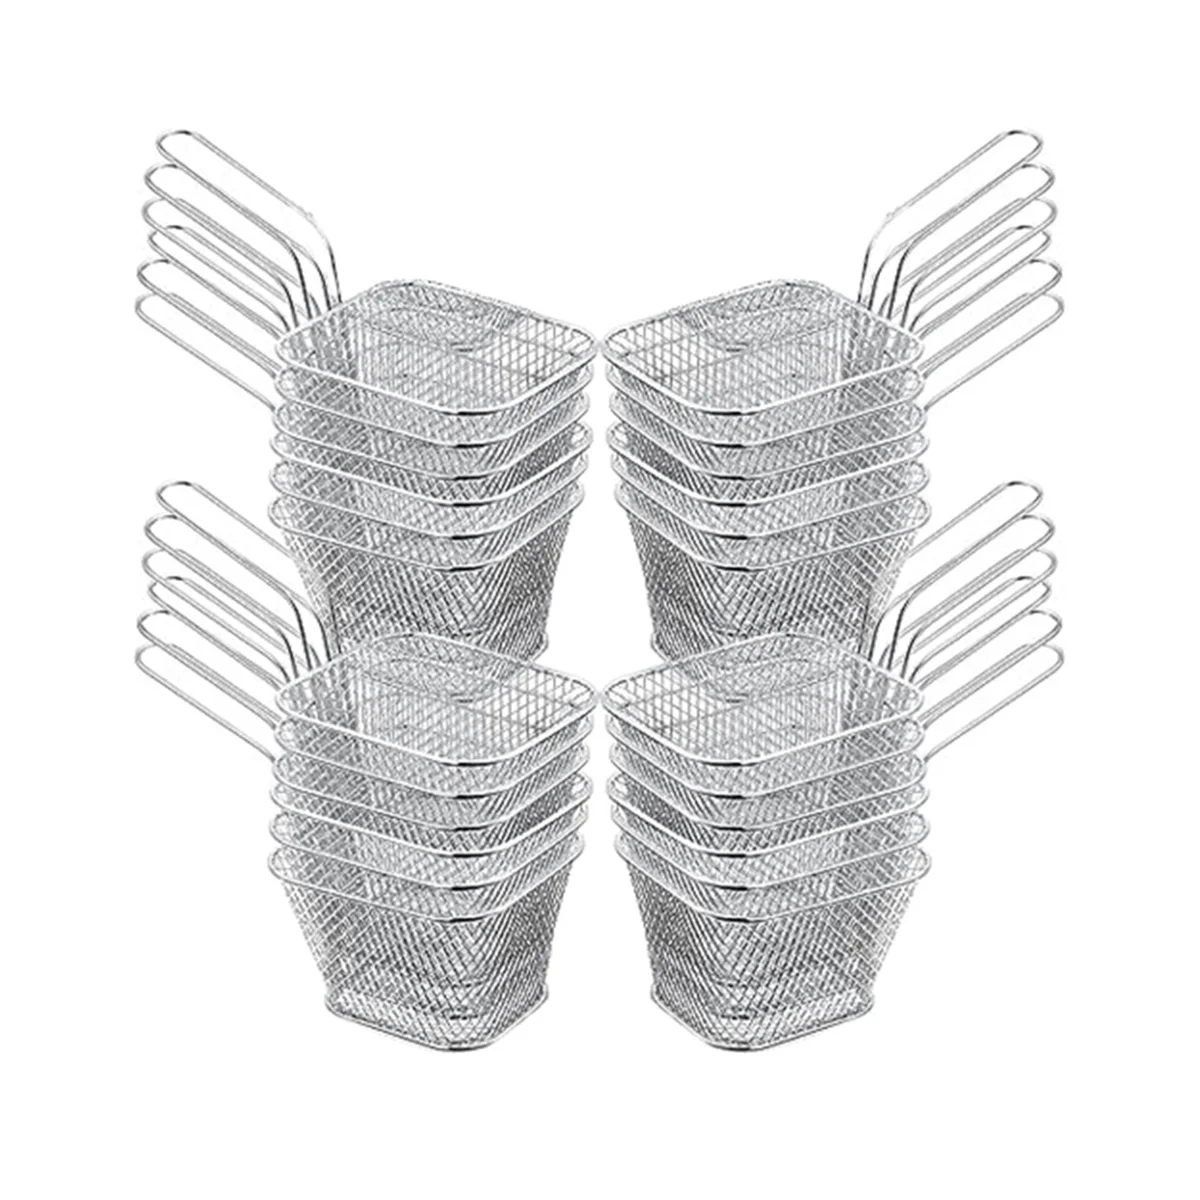 

24Pcs Mini Square Fry Basket Stainless Steel French Fry Holder Deep Fry Basket Mesh Food Basket with Handles(Silver)